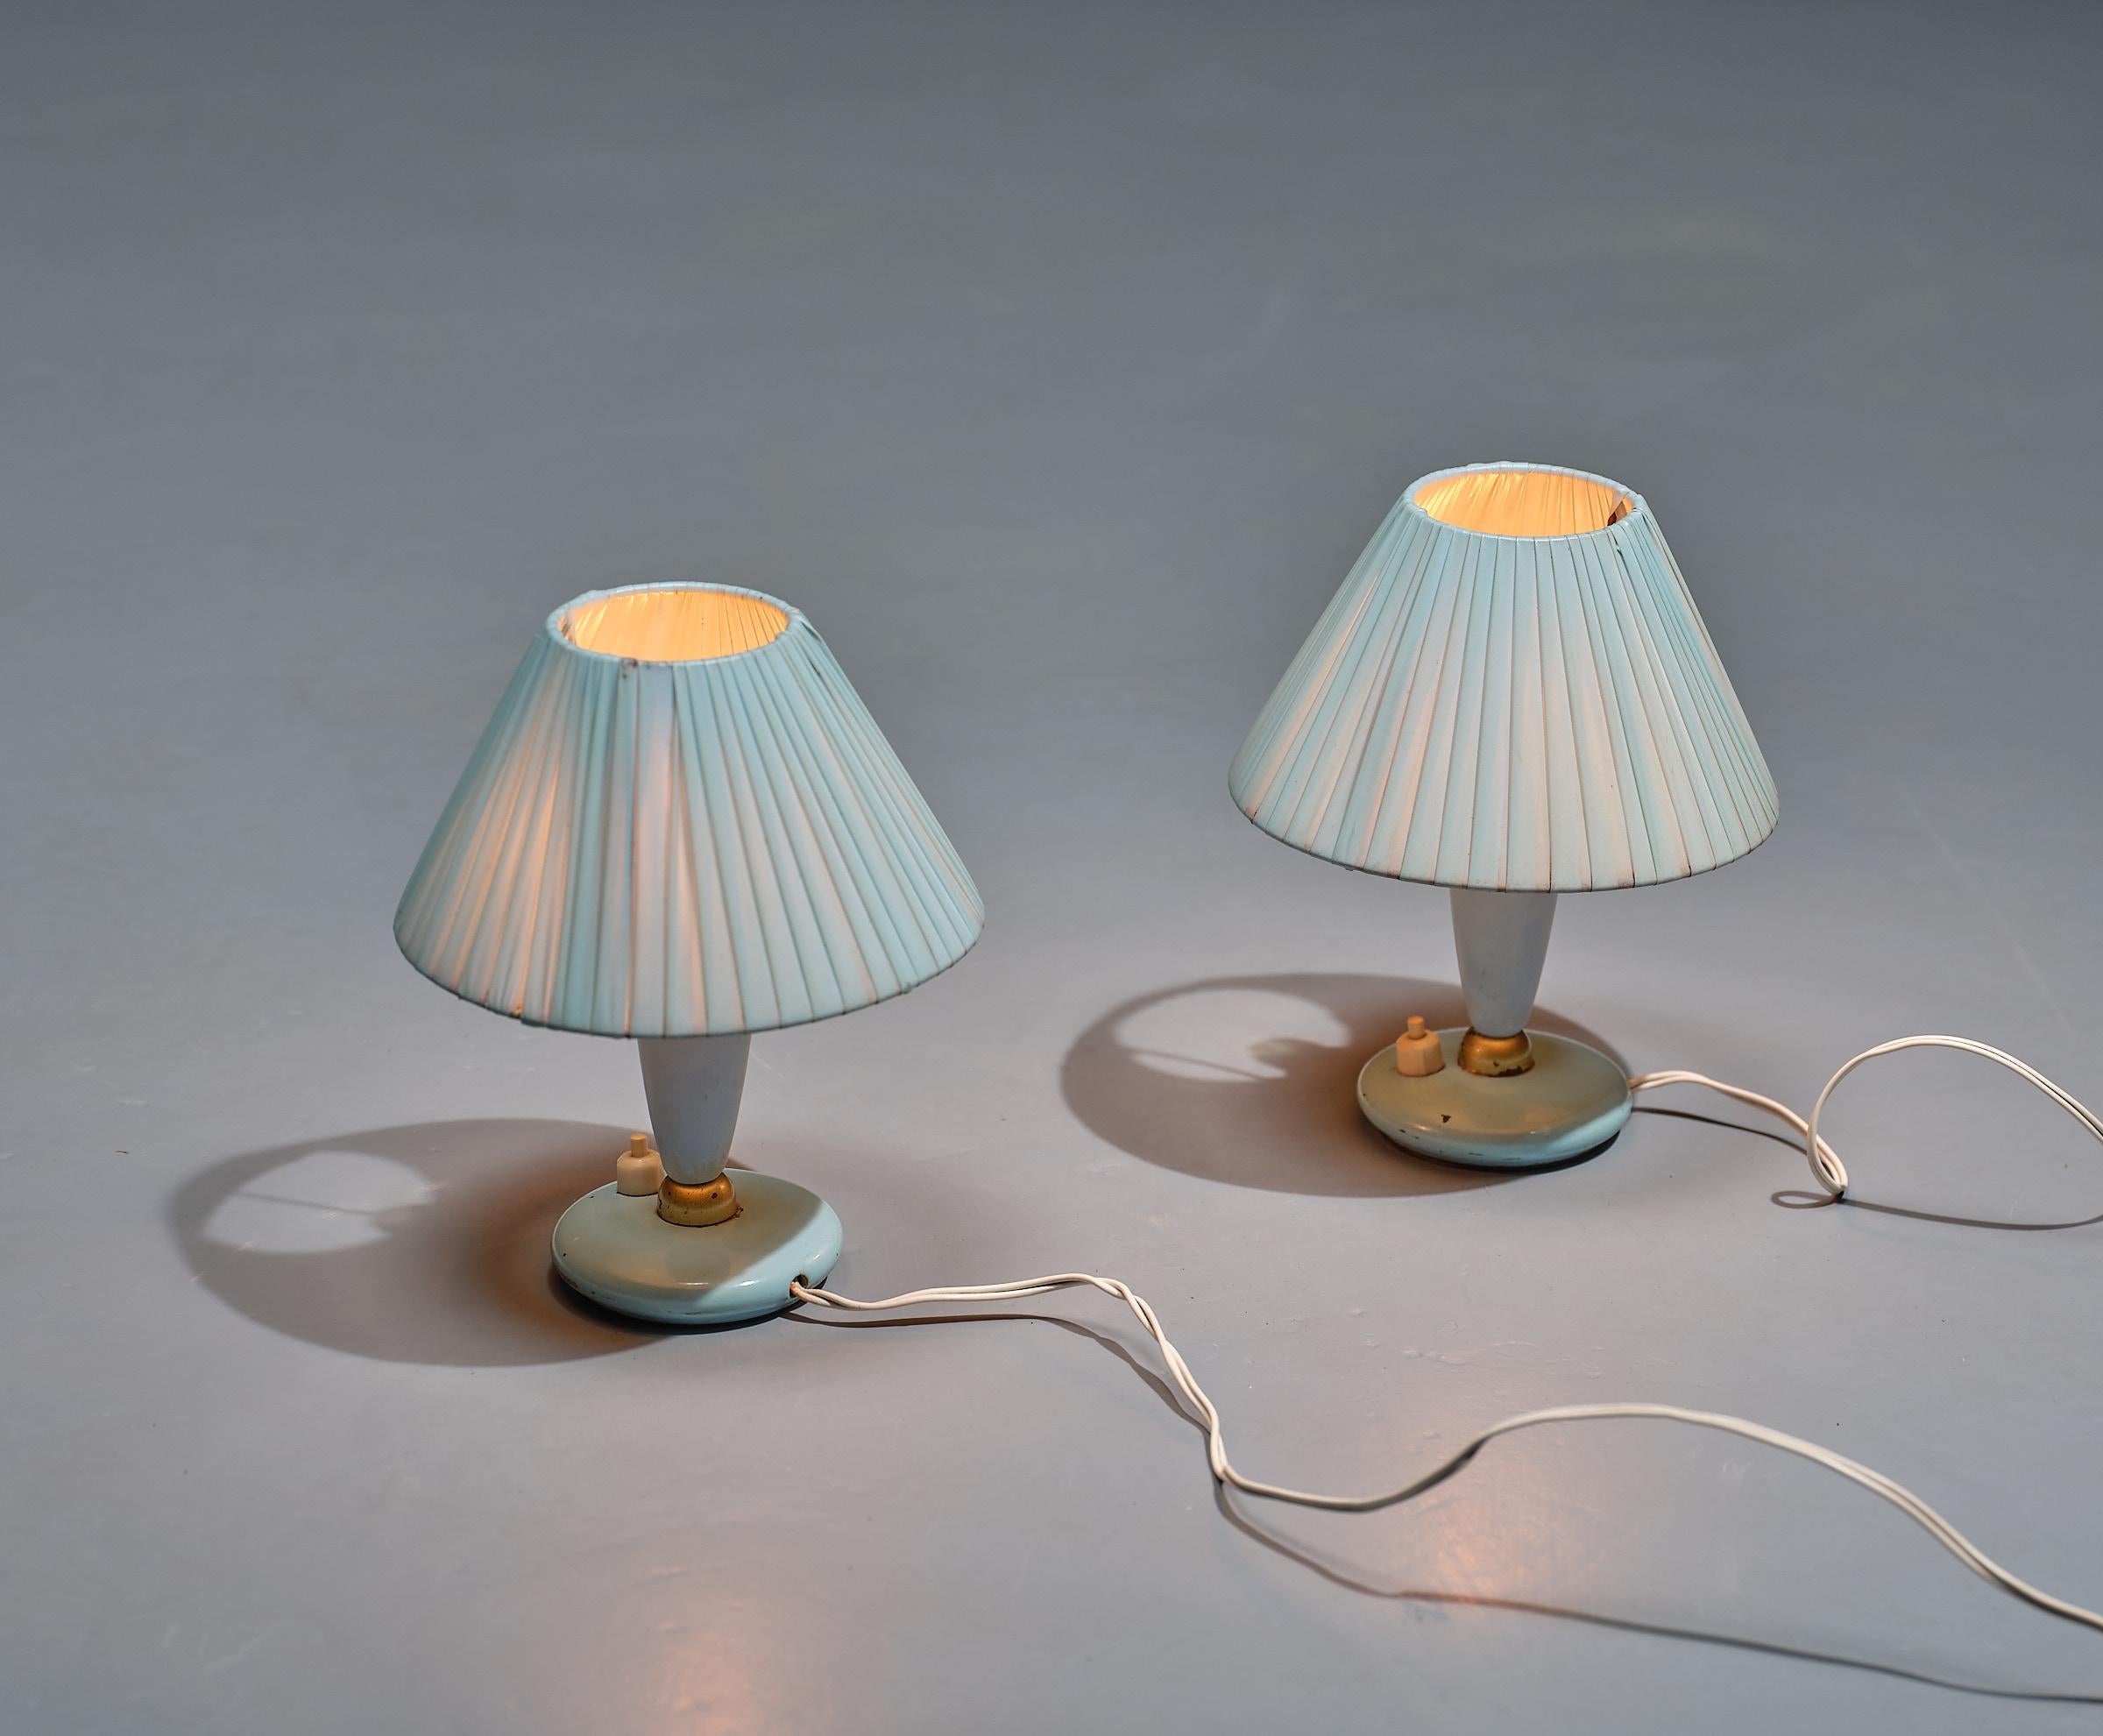 Presenting a pair of midcentury modern Italian bedside lamps from the 1950s, exuding timeless elegance and charm. These abat-jour lamps feature synthetic fabric lampshades, wooden bodies, and brass details, all in a soothing blue color that carries